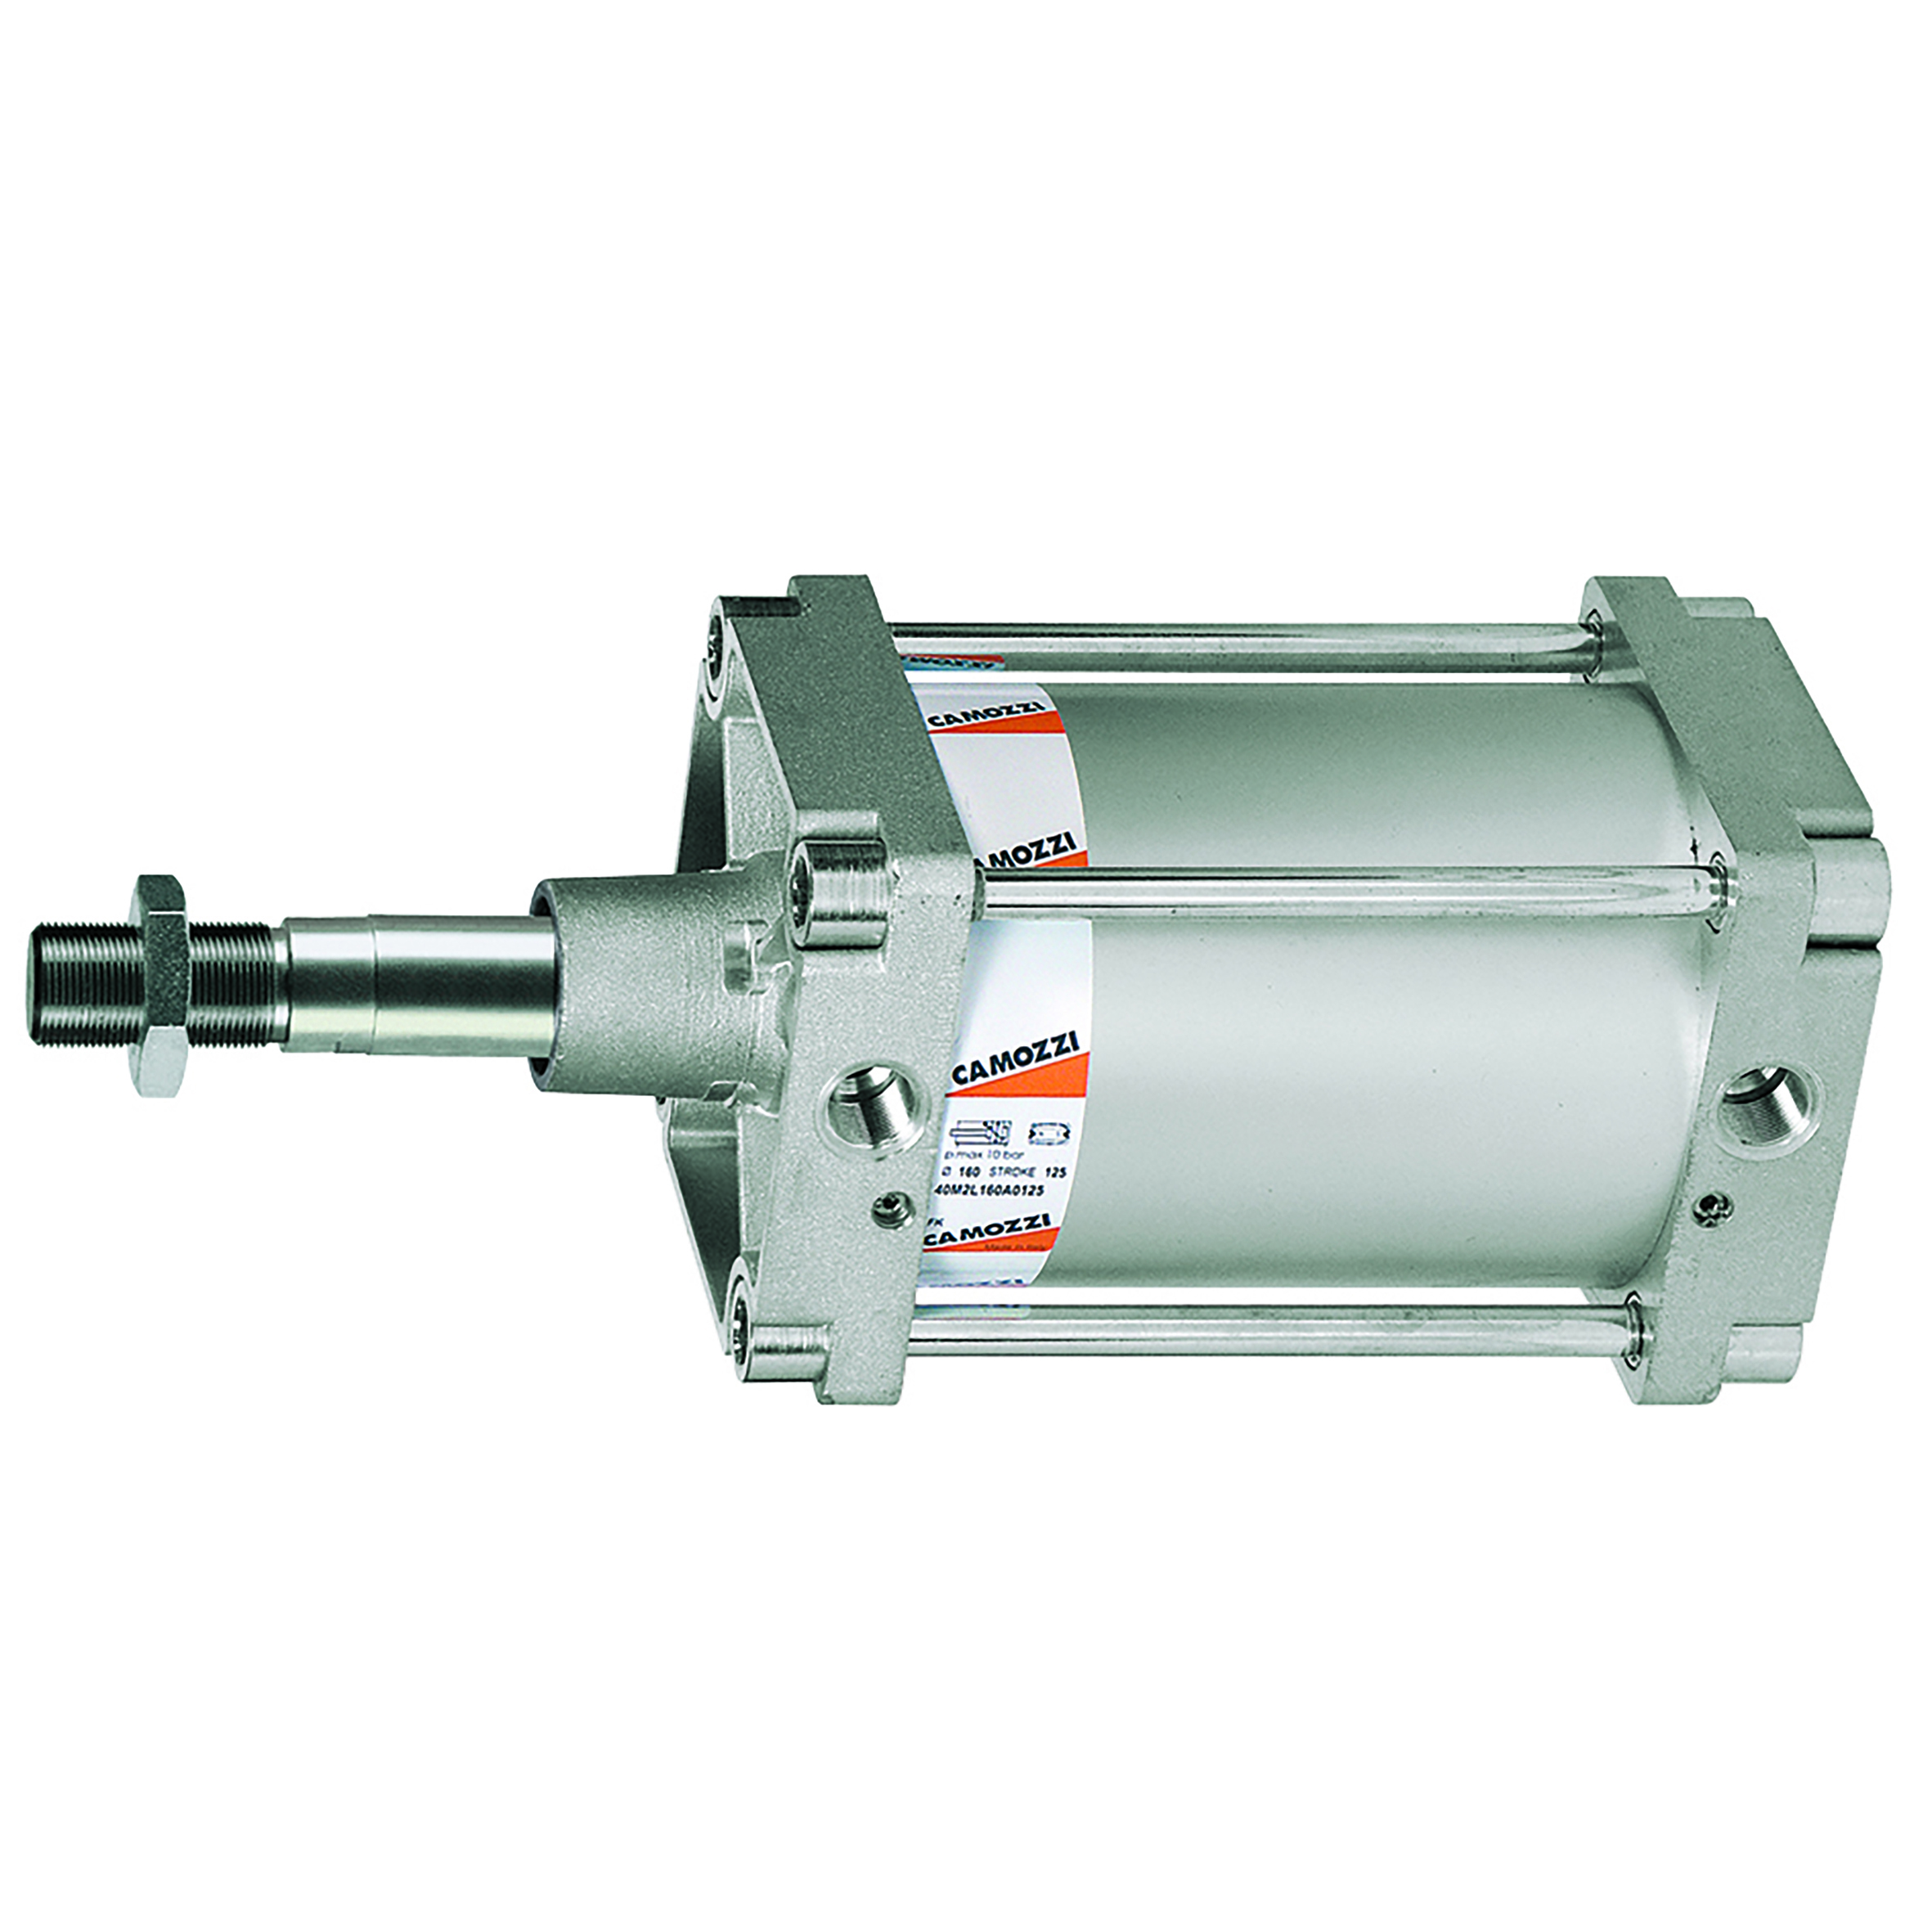 160X1250 3/4" BSPP S40 DBLE ACT CYLINDER